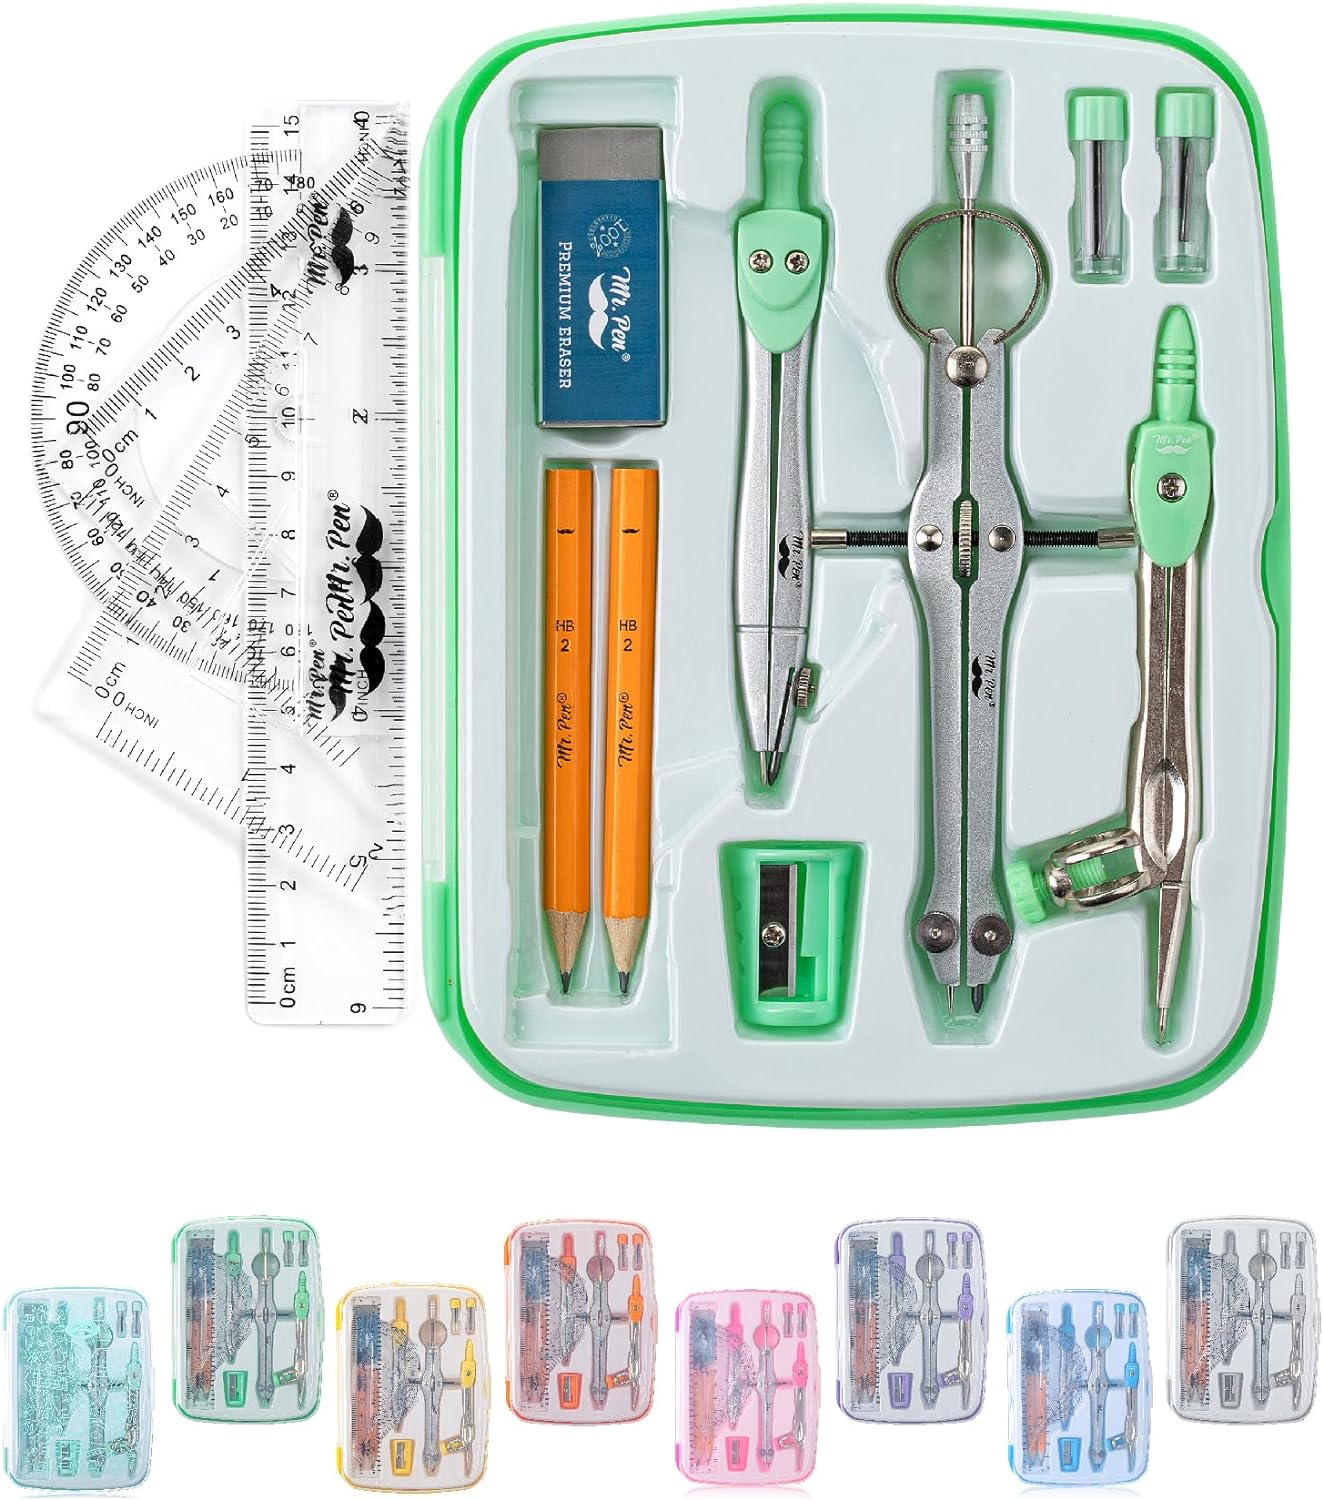 Geometry Set, 13 pcs, Mint Green, Compass for Geometry Compass Math, Geometry Kit Set with Shatterproof Storage Box, Math Compass, Geometry Set for School, Protractor and Compass Set